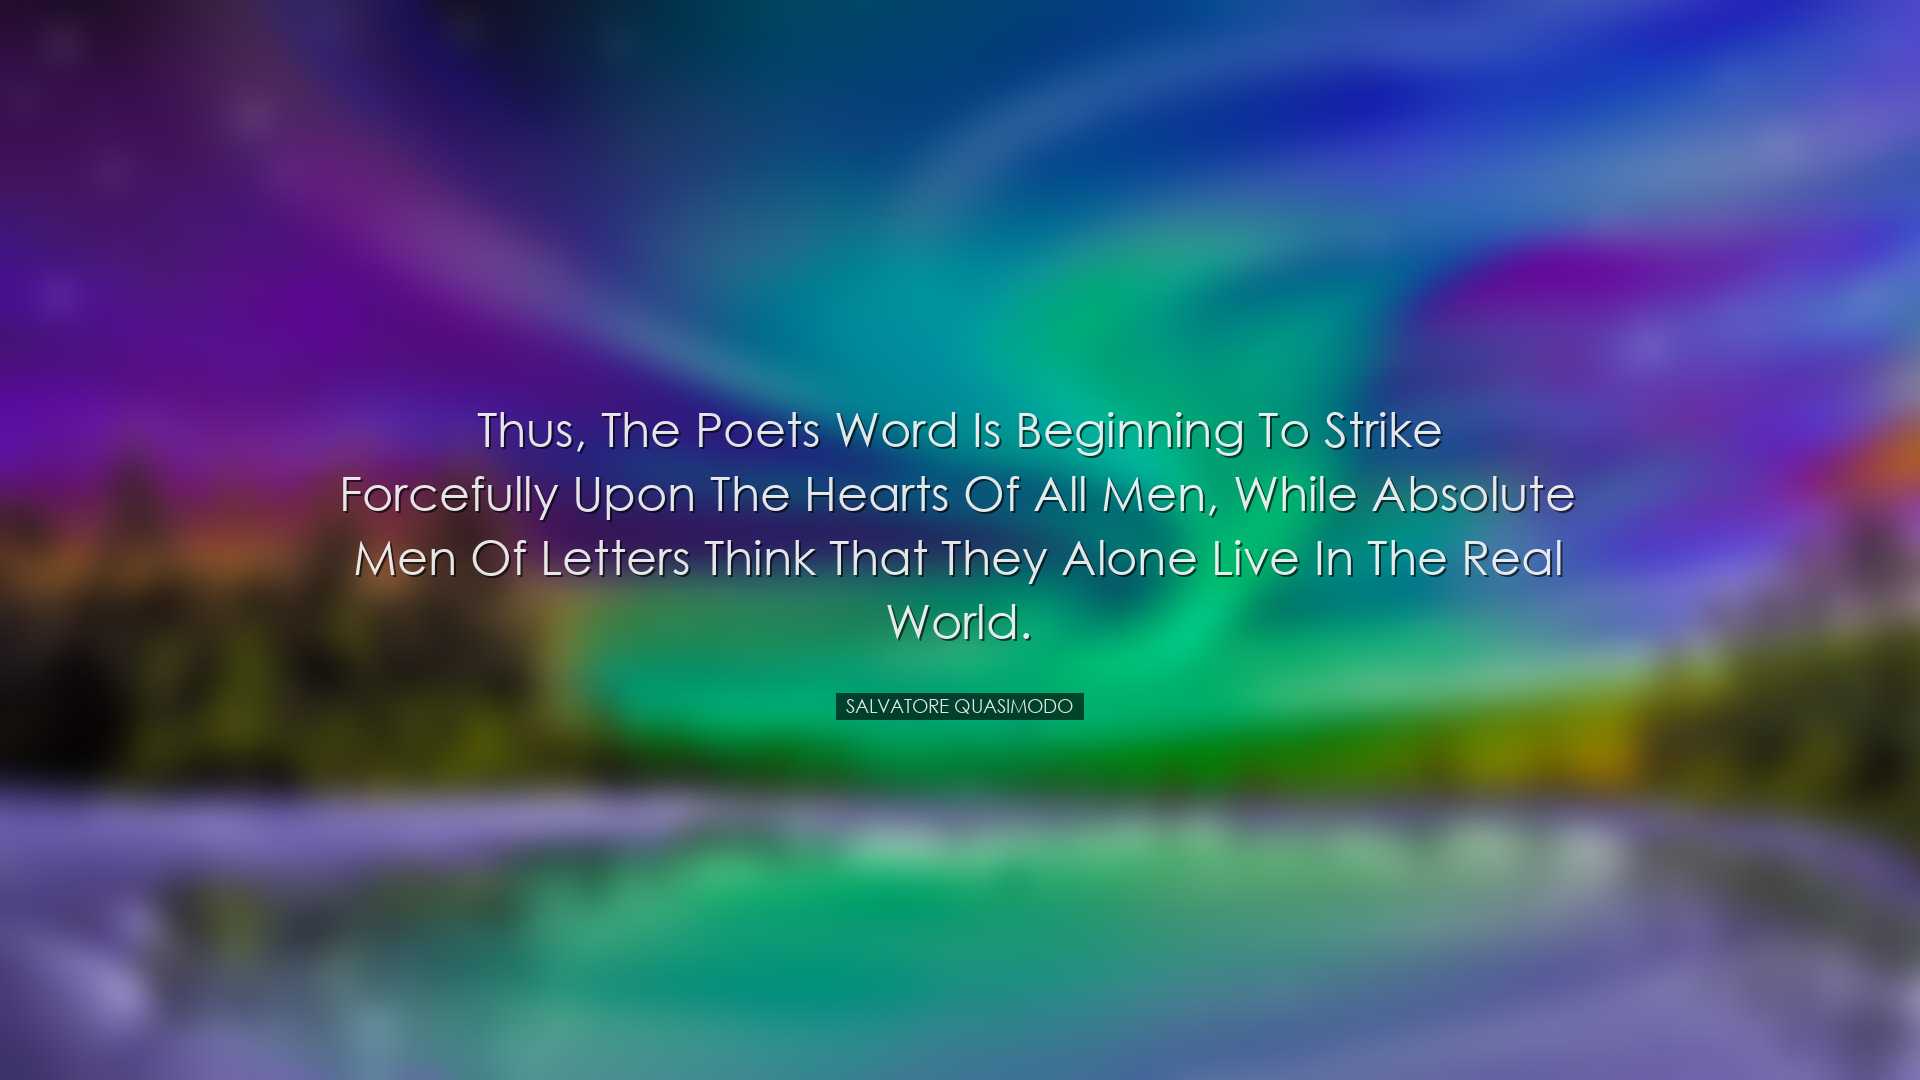 Thus, the poets word is beginning to strike forcefully upon the he